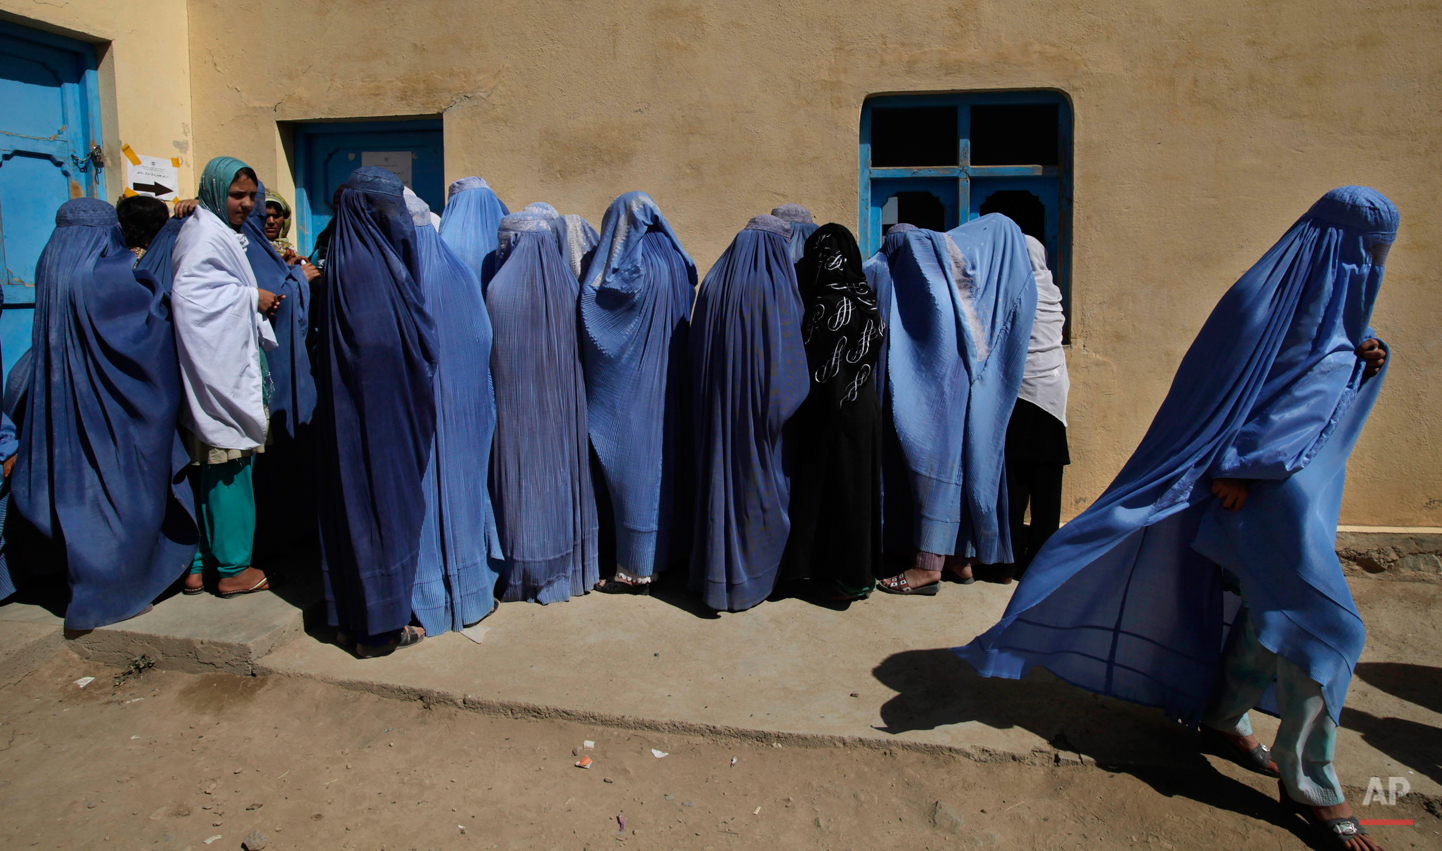  A woman leaves after casting her vote during the pariament elections in Kabul, Afghanistan, Saturday, Sept. 18, 2010. (AP Photo/Saurabh Das) 